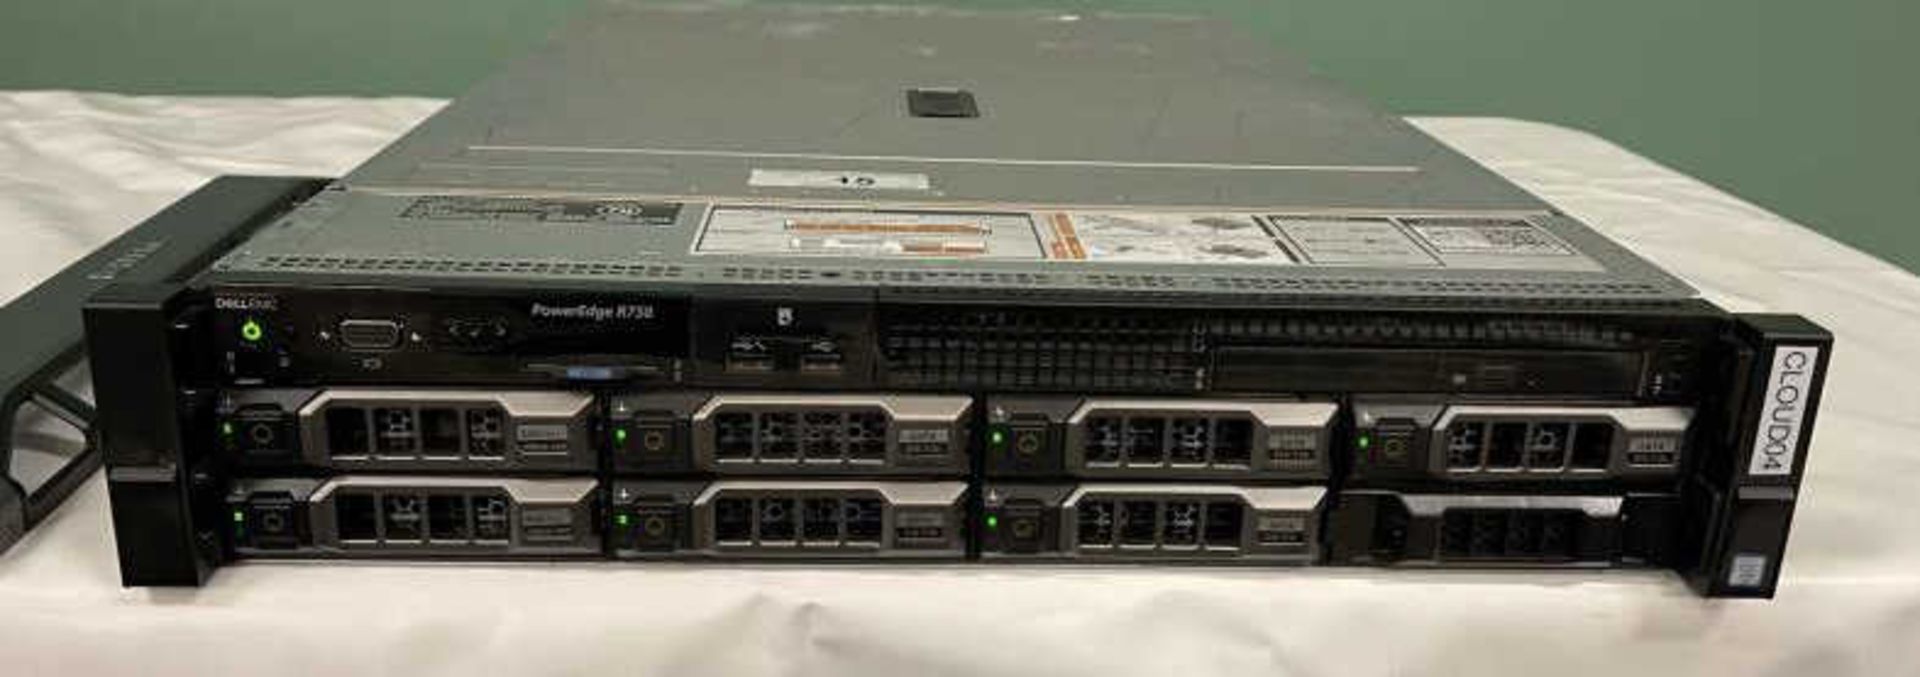 Dell M: E31S PowerEdge R730, Powers Up, (2) 480 GB Drive & (5) 2 TB Drive, No Further Testing Done - Image 2 of 8